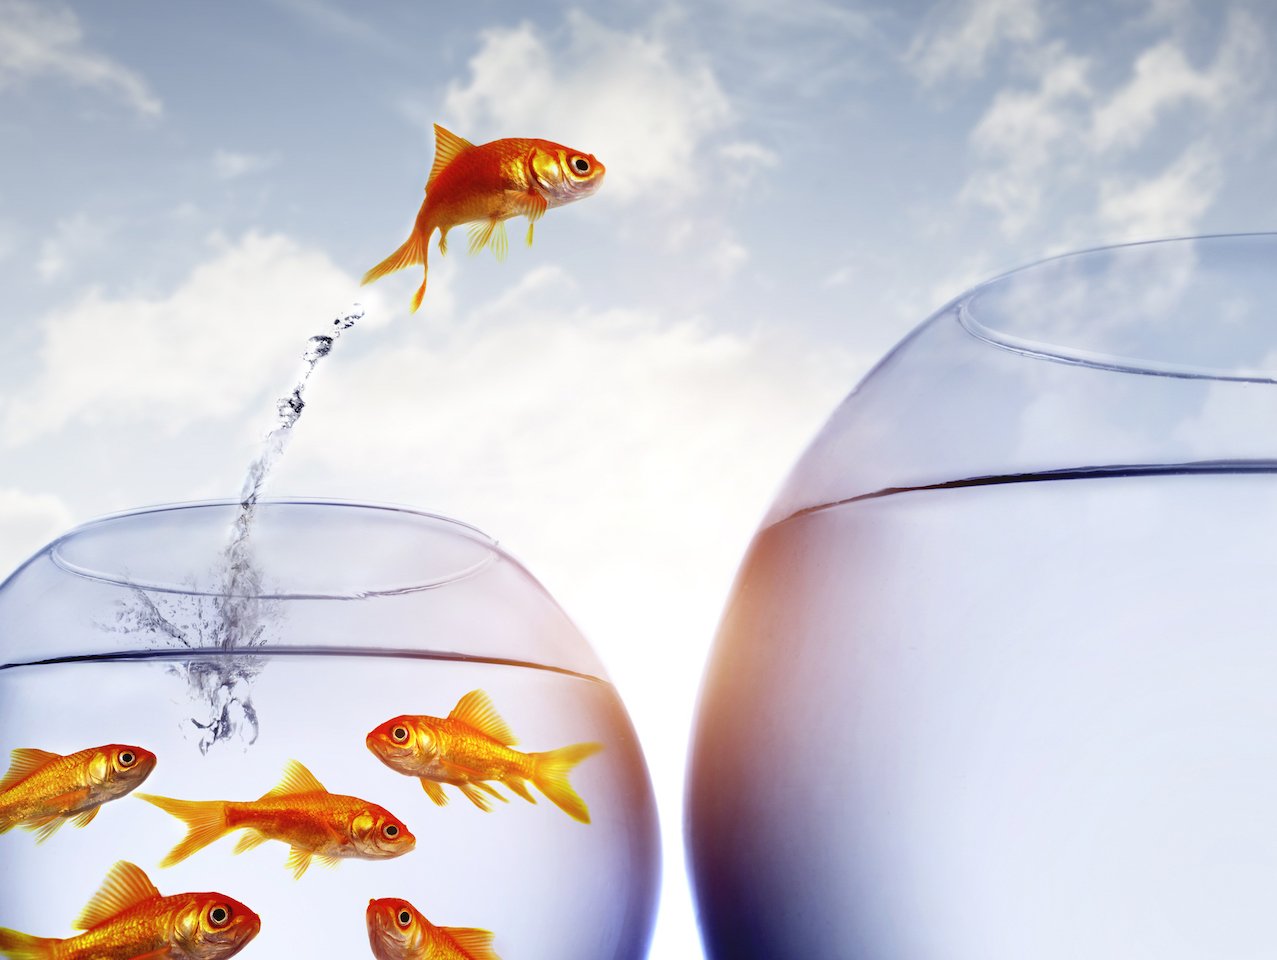 A photo illustration of a goldfish jumping out of the water from a crowded bowl